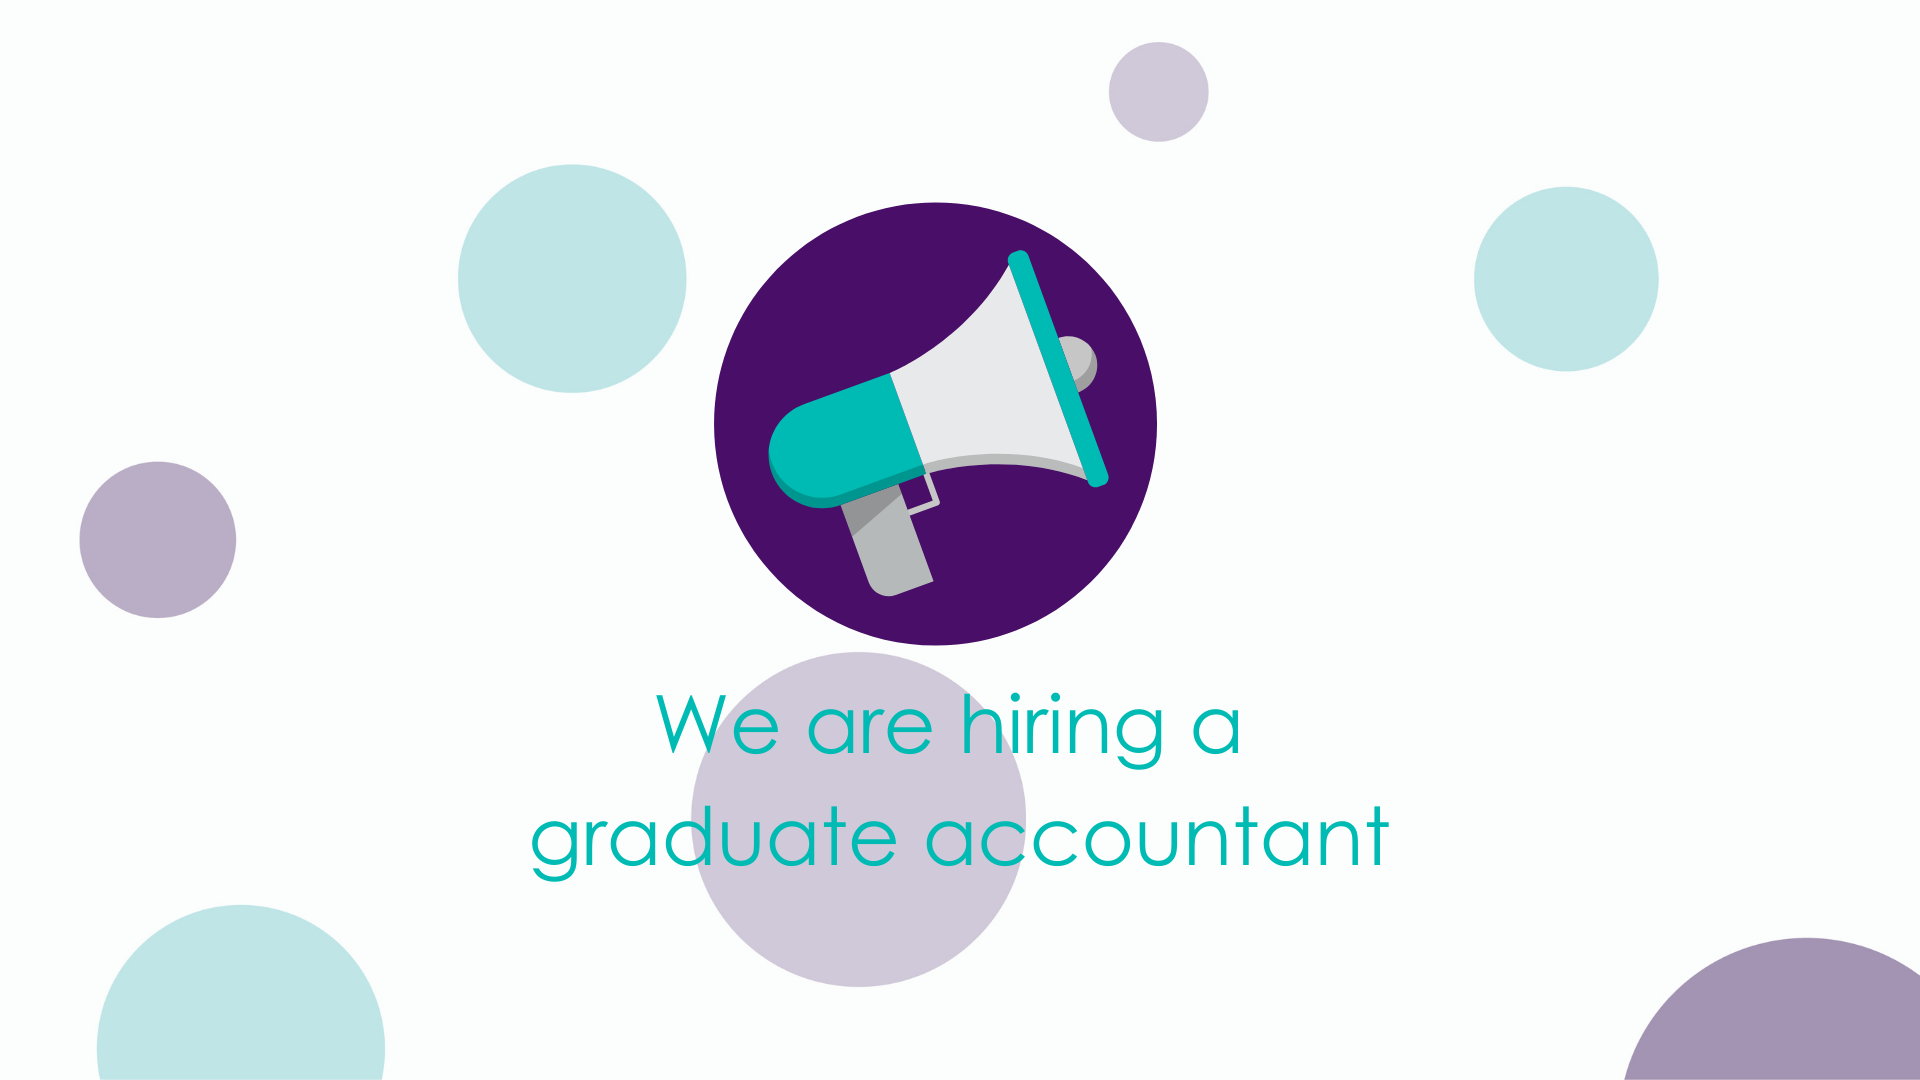 We are recruiting for a graduate accountant